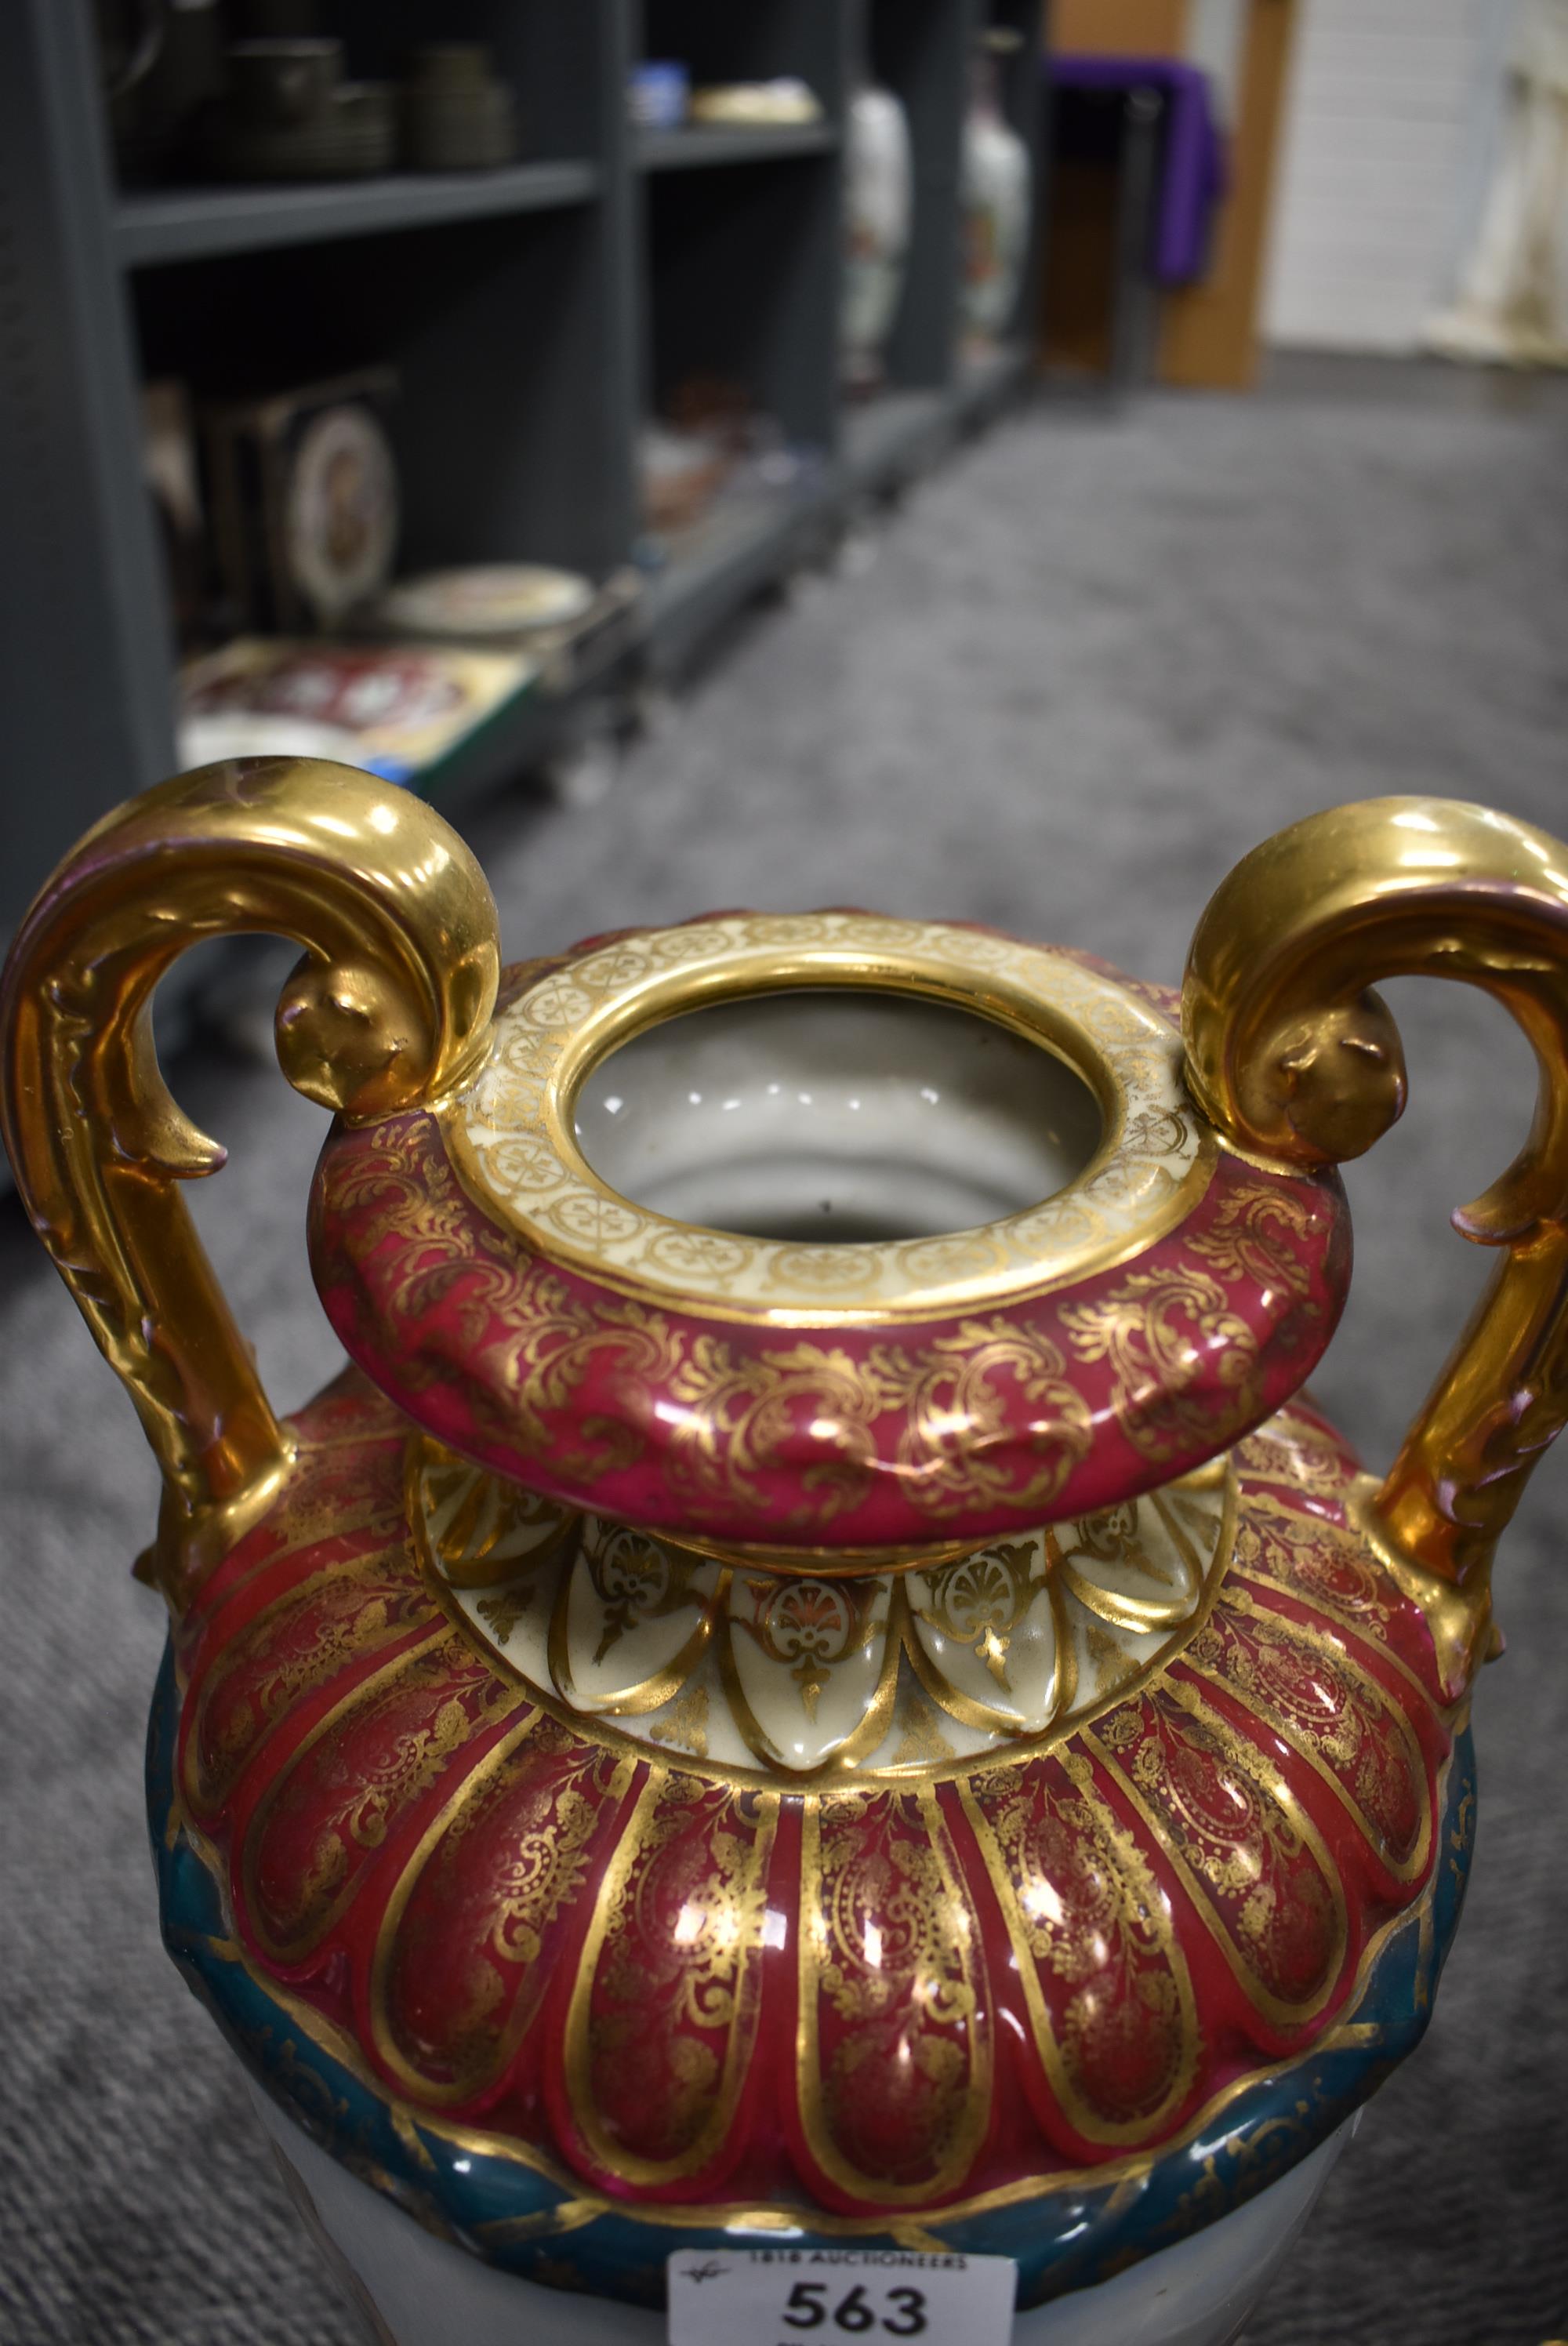 A large pair of impressive urns, thought to be Royal Vienna having heavy and ornate gilt detailing - Image 6 of 7